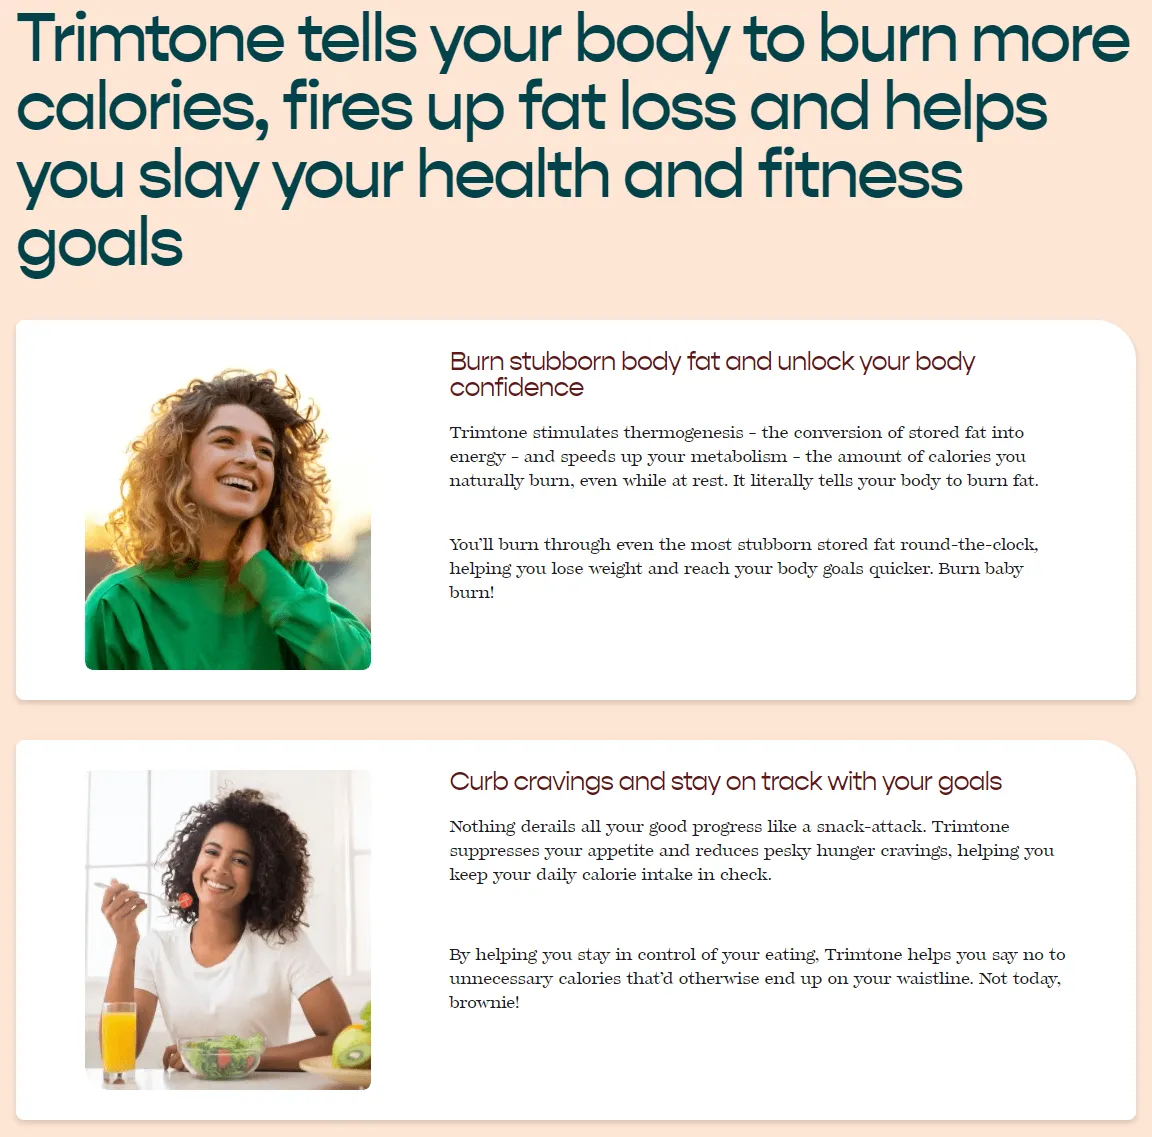 Trimtone-tells-your-body-to-burn-more-calories-fires-up-fat-loss-and-helps-you-slay-your-health-and-fitness-goals